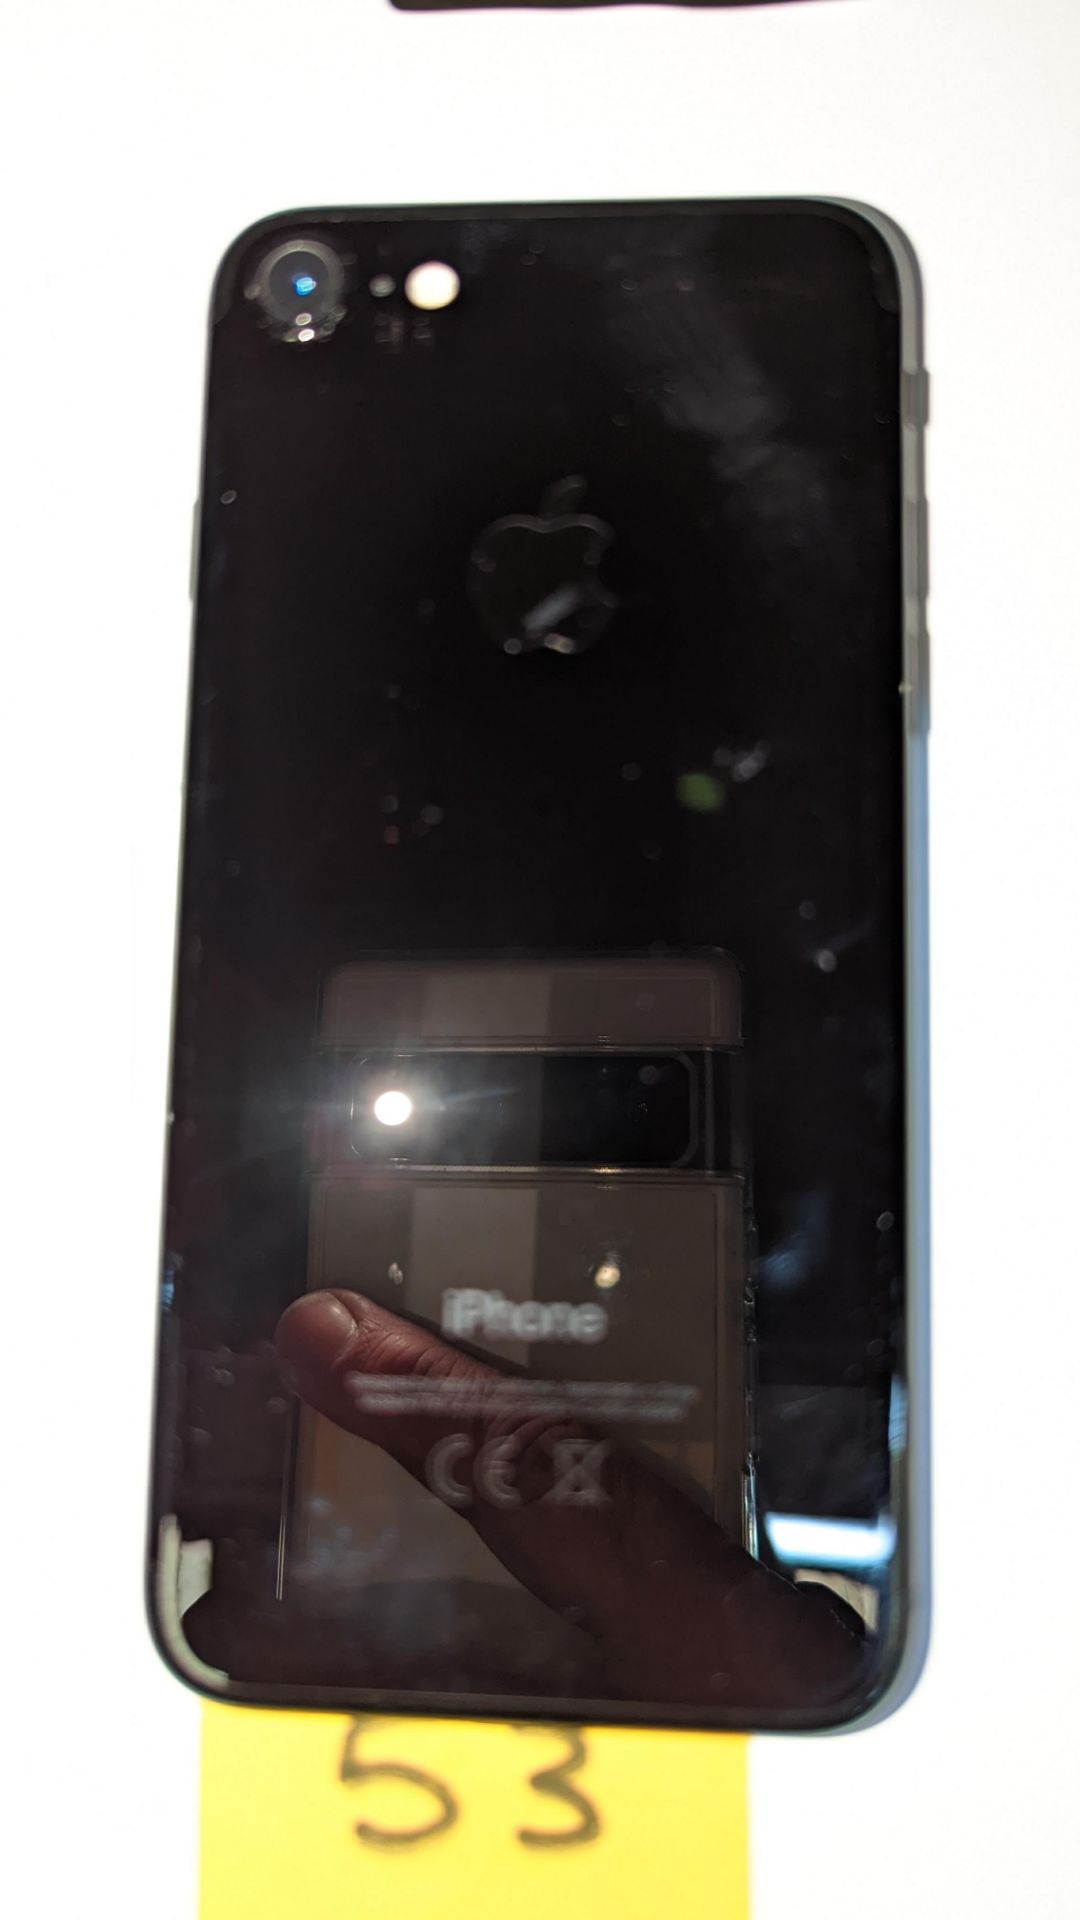 Apple iPhone 7, 32GB capacity, model A1778. No ancillaries or accessories - Image 8 of 13